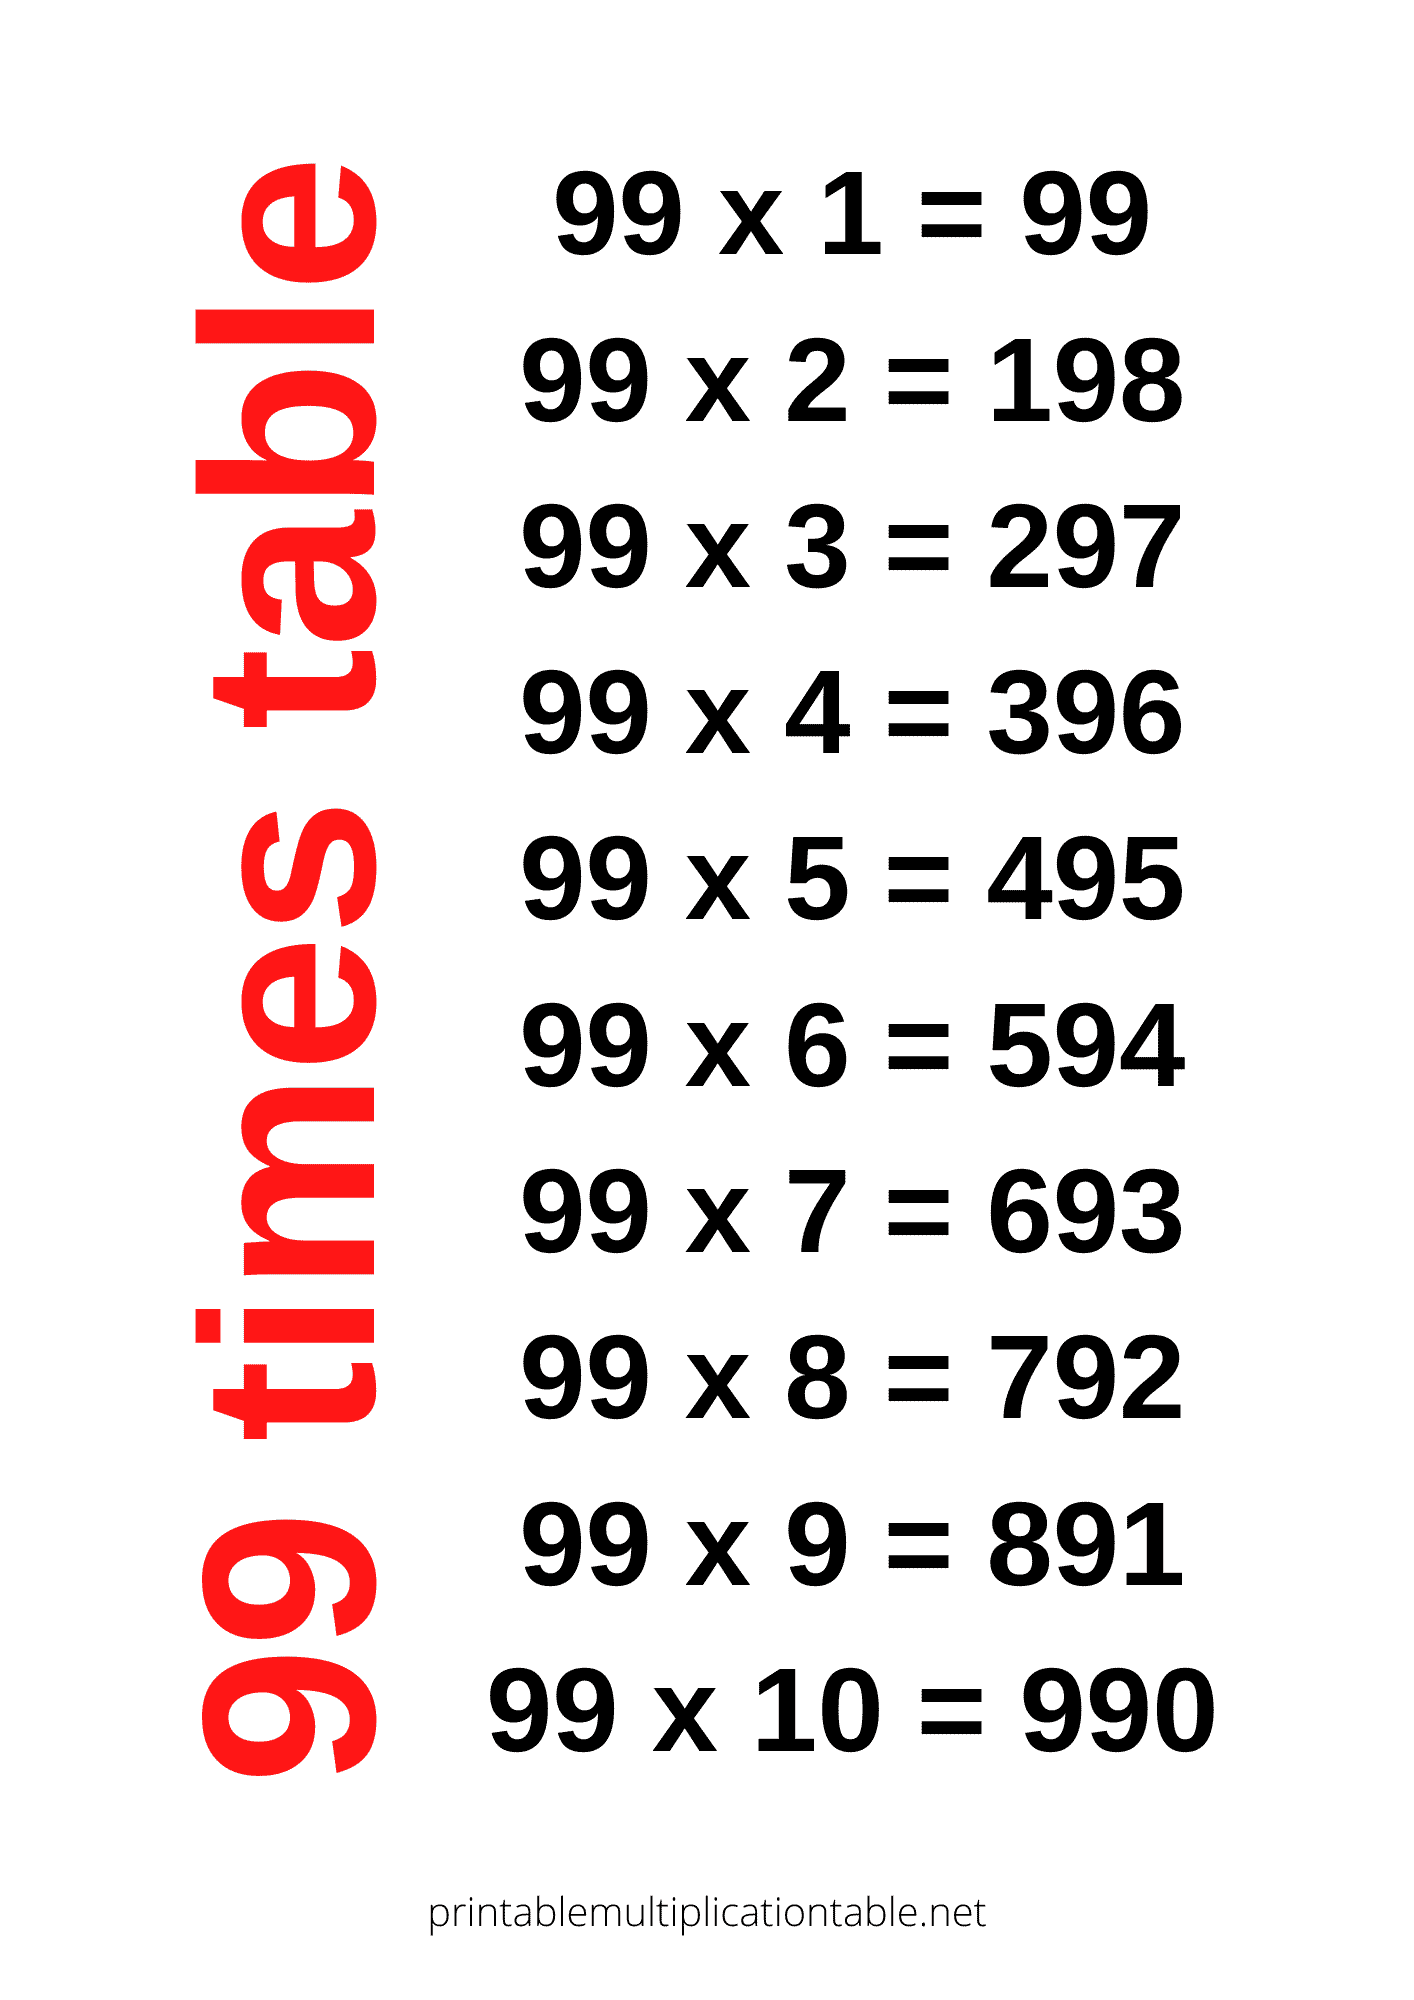 99 times table chart